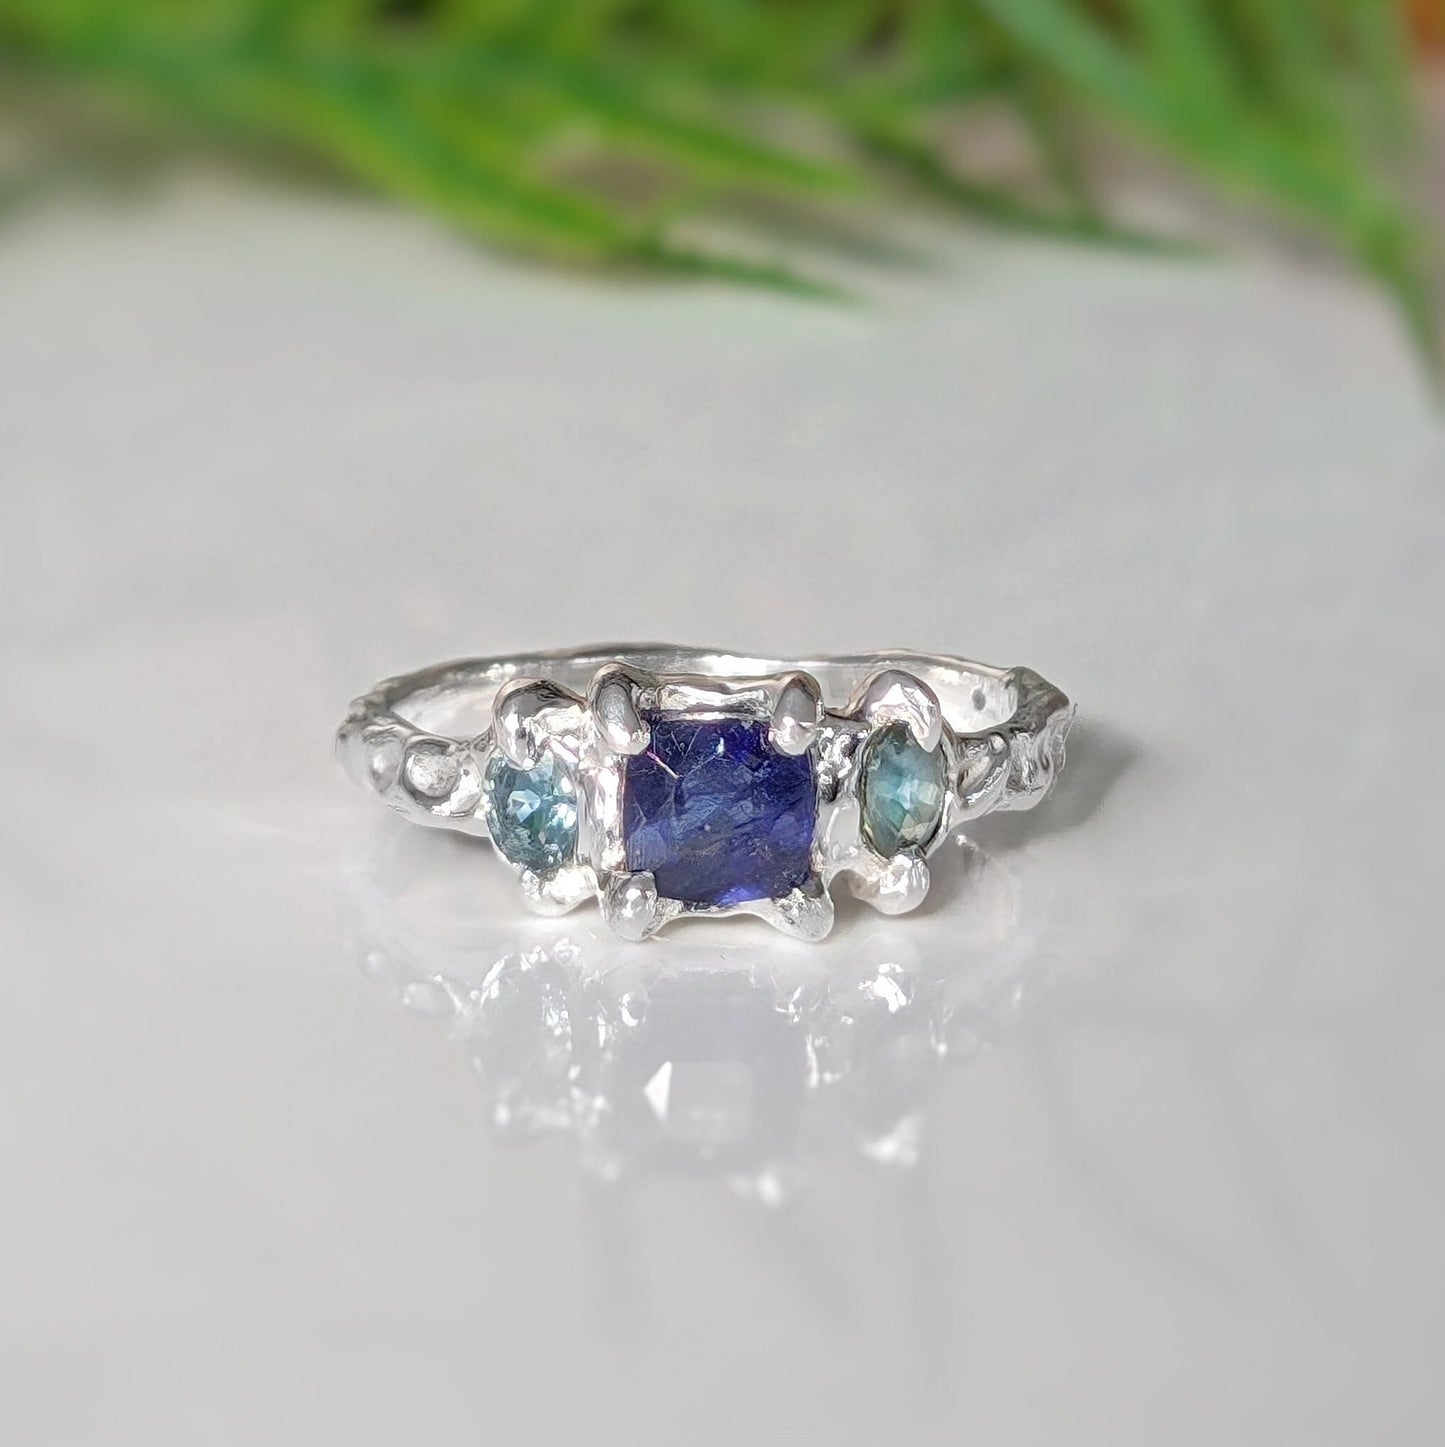 Square Blue Sapphire and 2 small green Tourmaline set by prongs on a textured sterling silver band